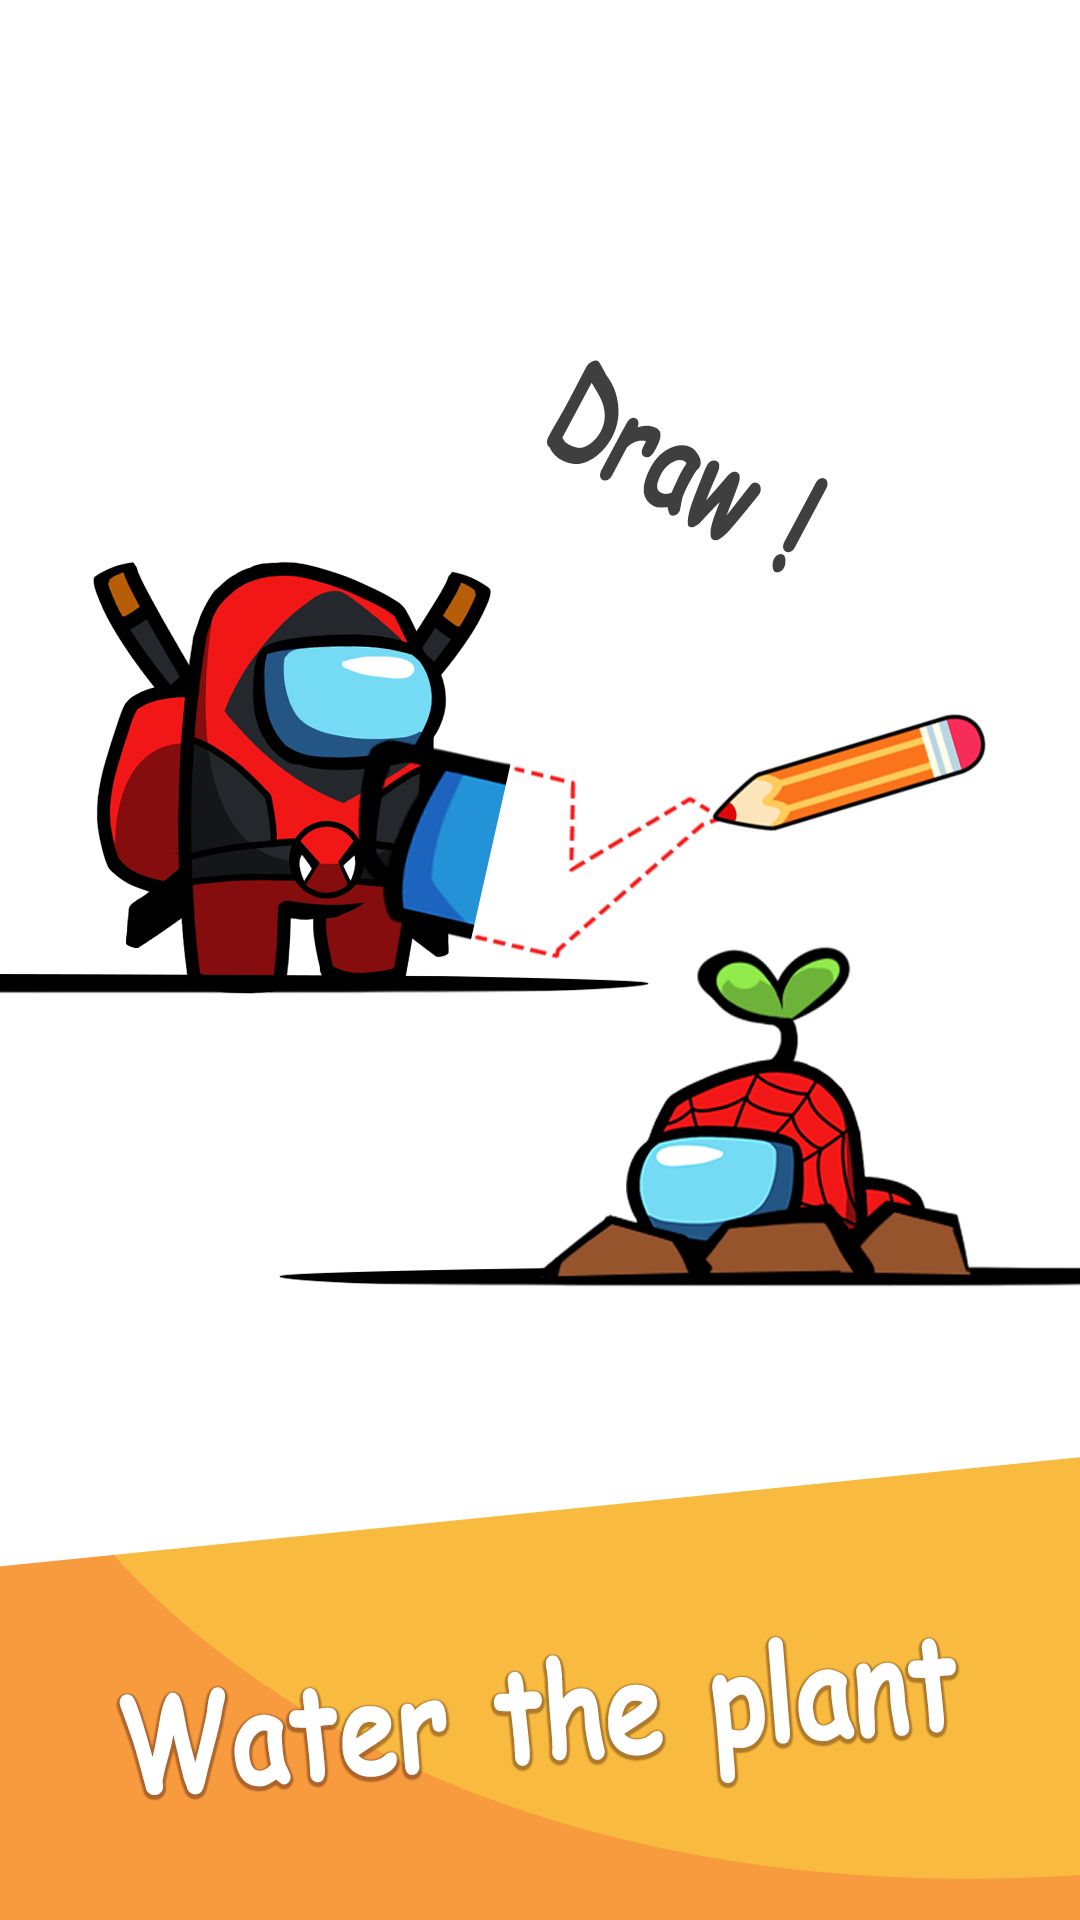 Draw It - Draw One Part - Puzzle Game for Android